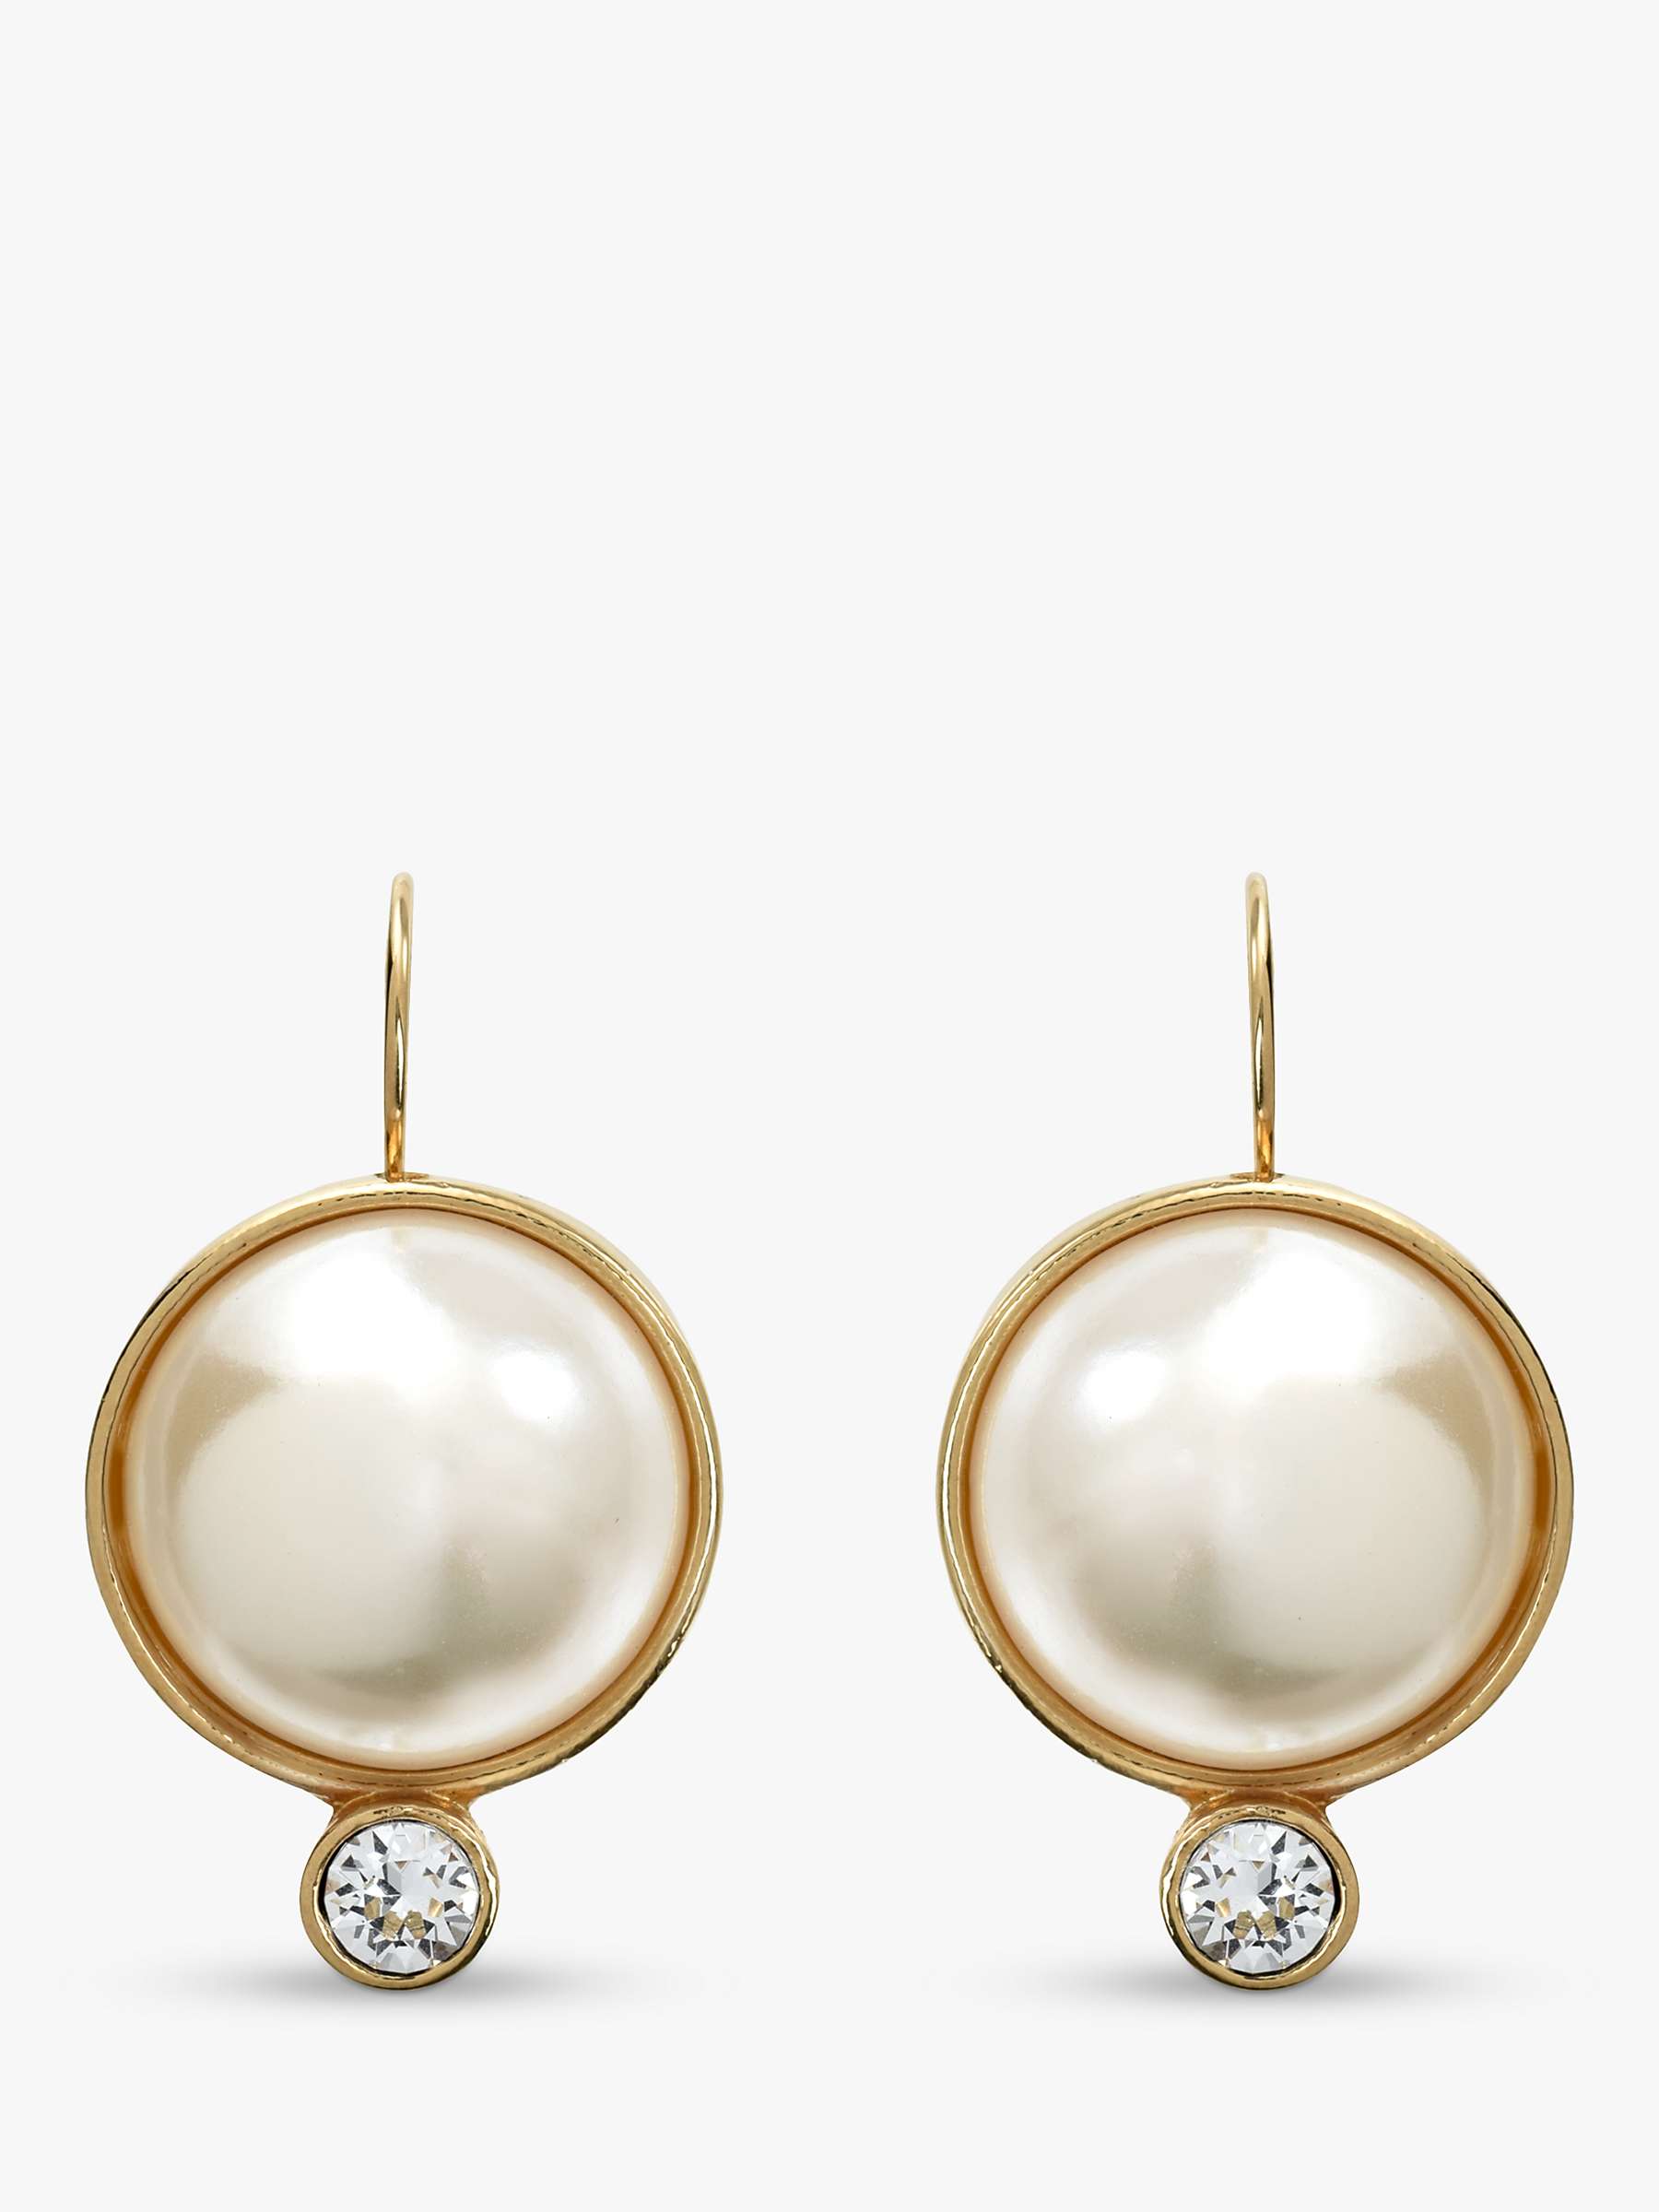 Buy Eclectica Vintage 18ct Gold Plated Statement Pearl Swarovski Crystal Earrings, Cream Online at johnlewis.com